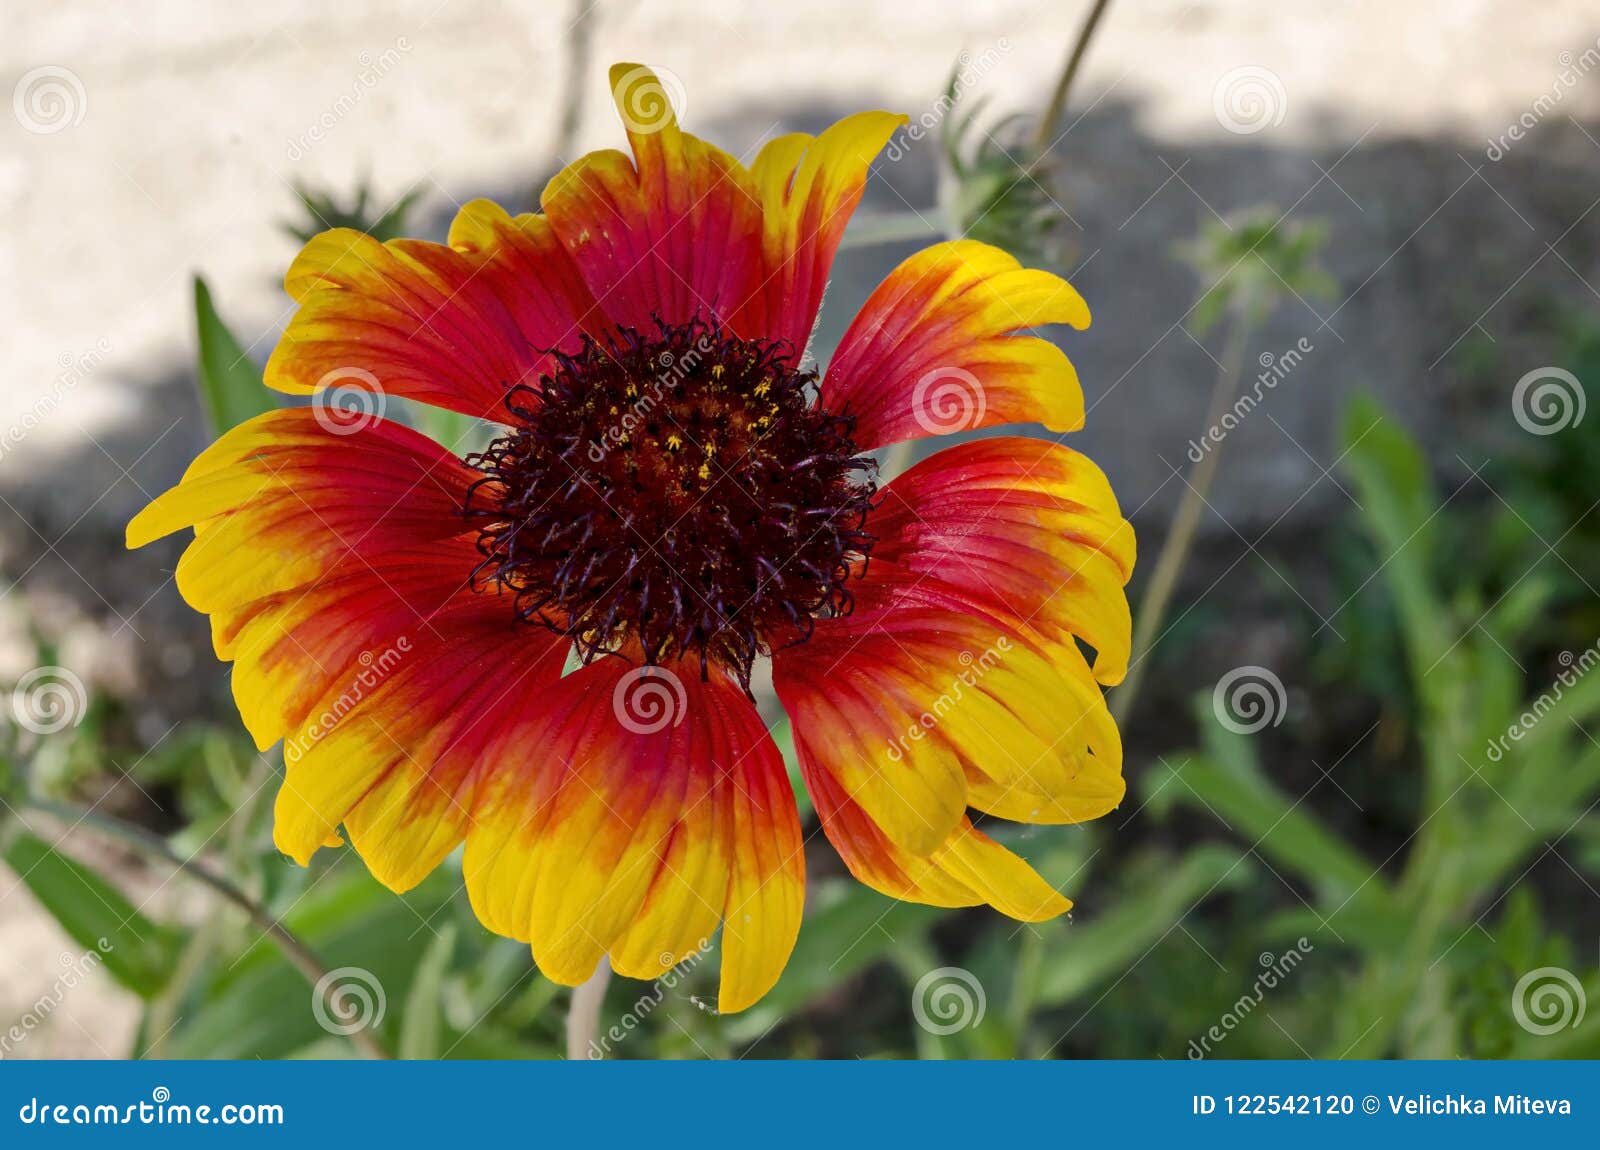 Gaillardia Aristata Or Blanket Flower With Red And Yellow Petals